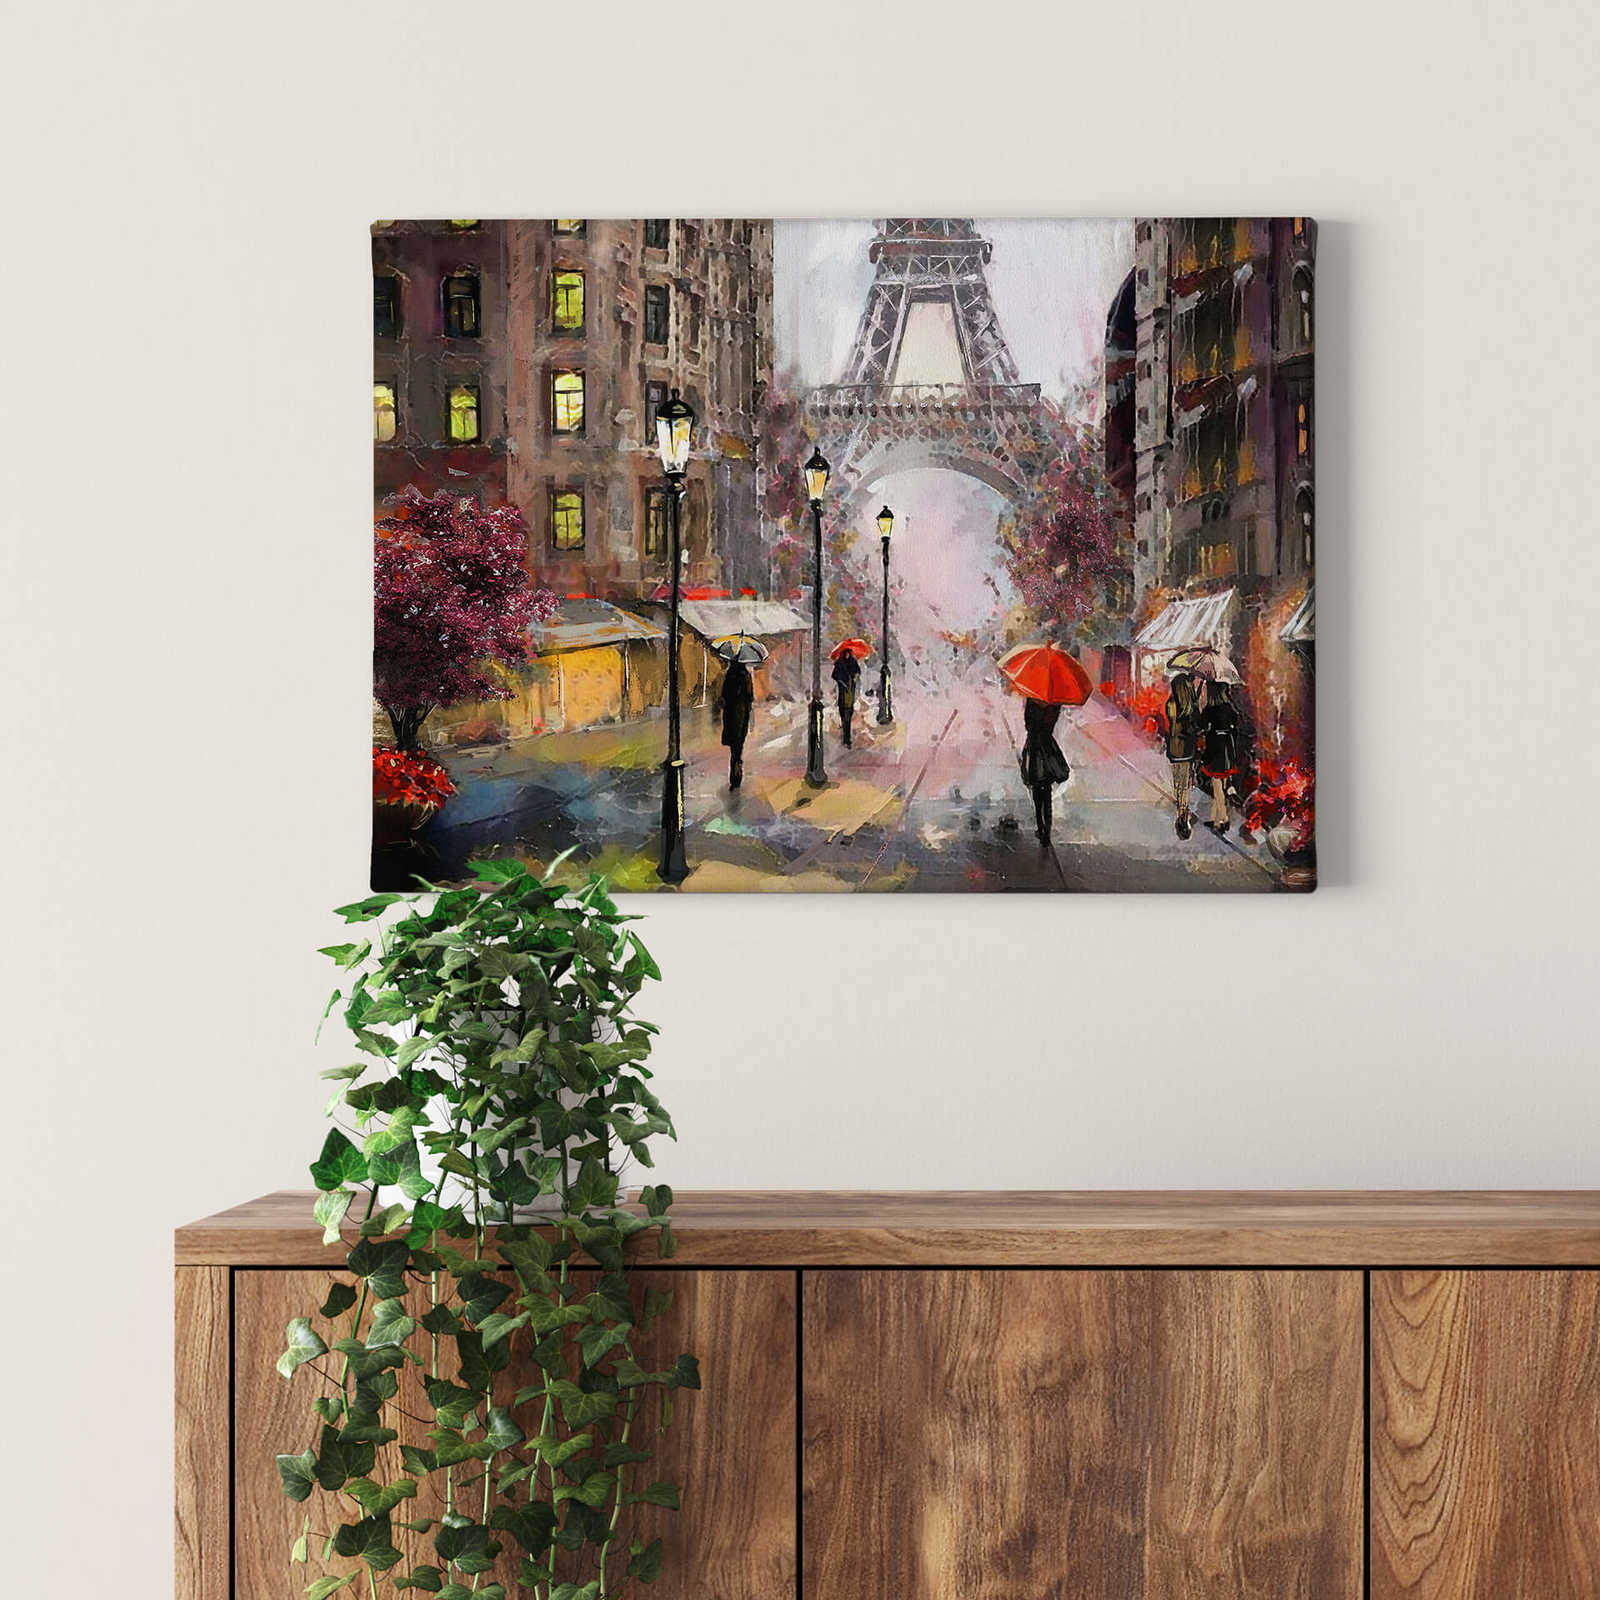             Canvas print Paris in print style, painting style
        